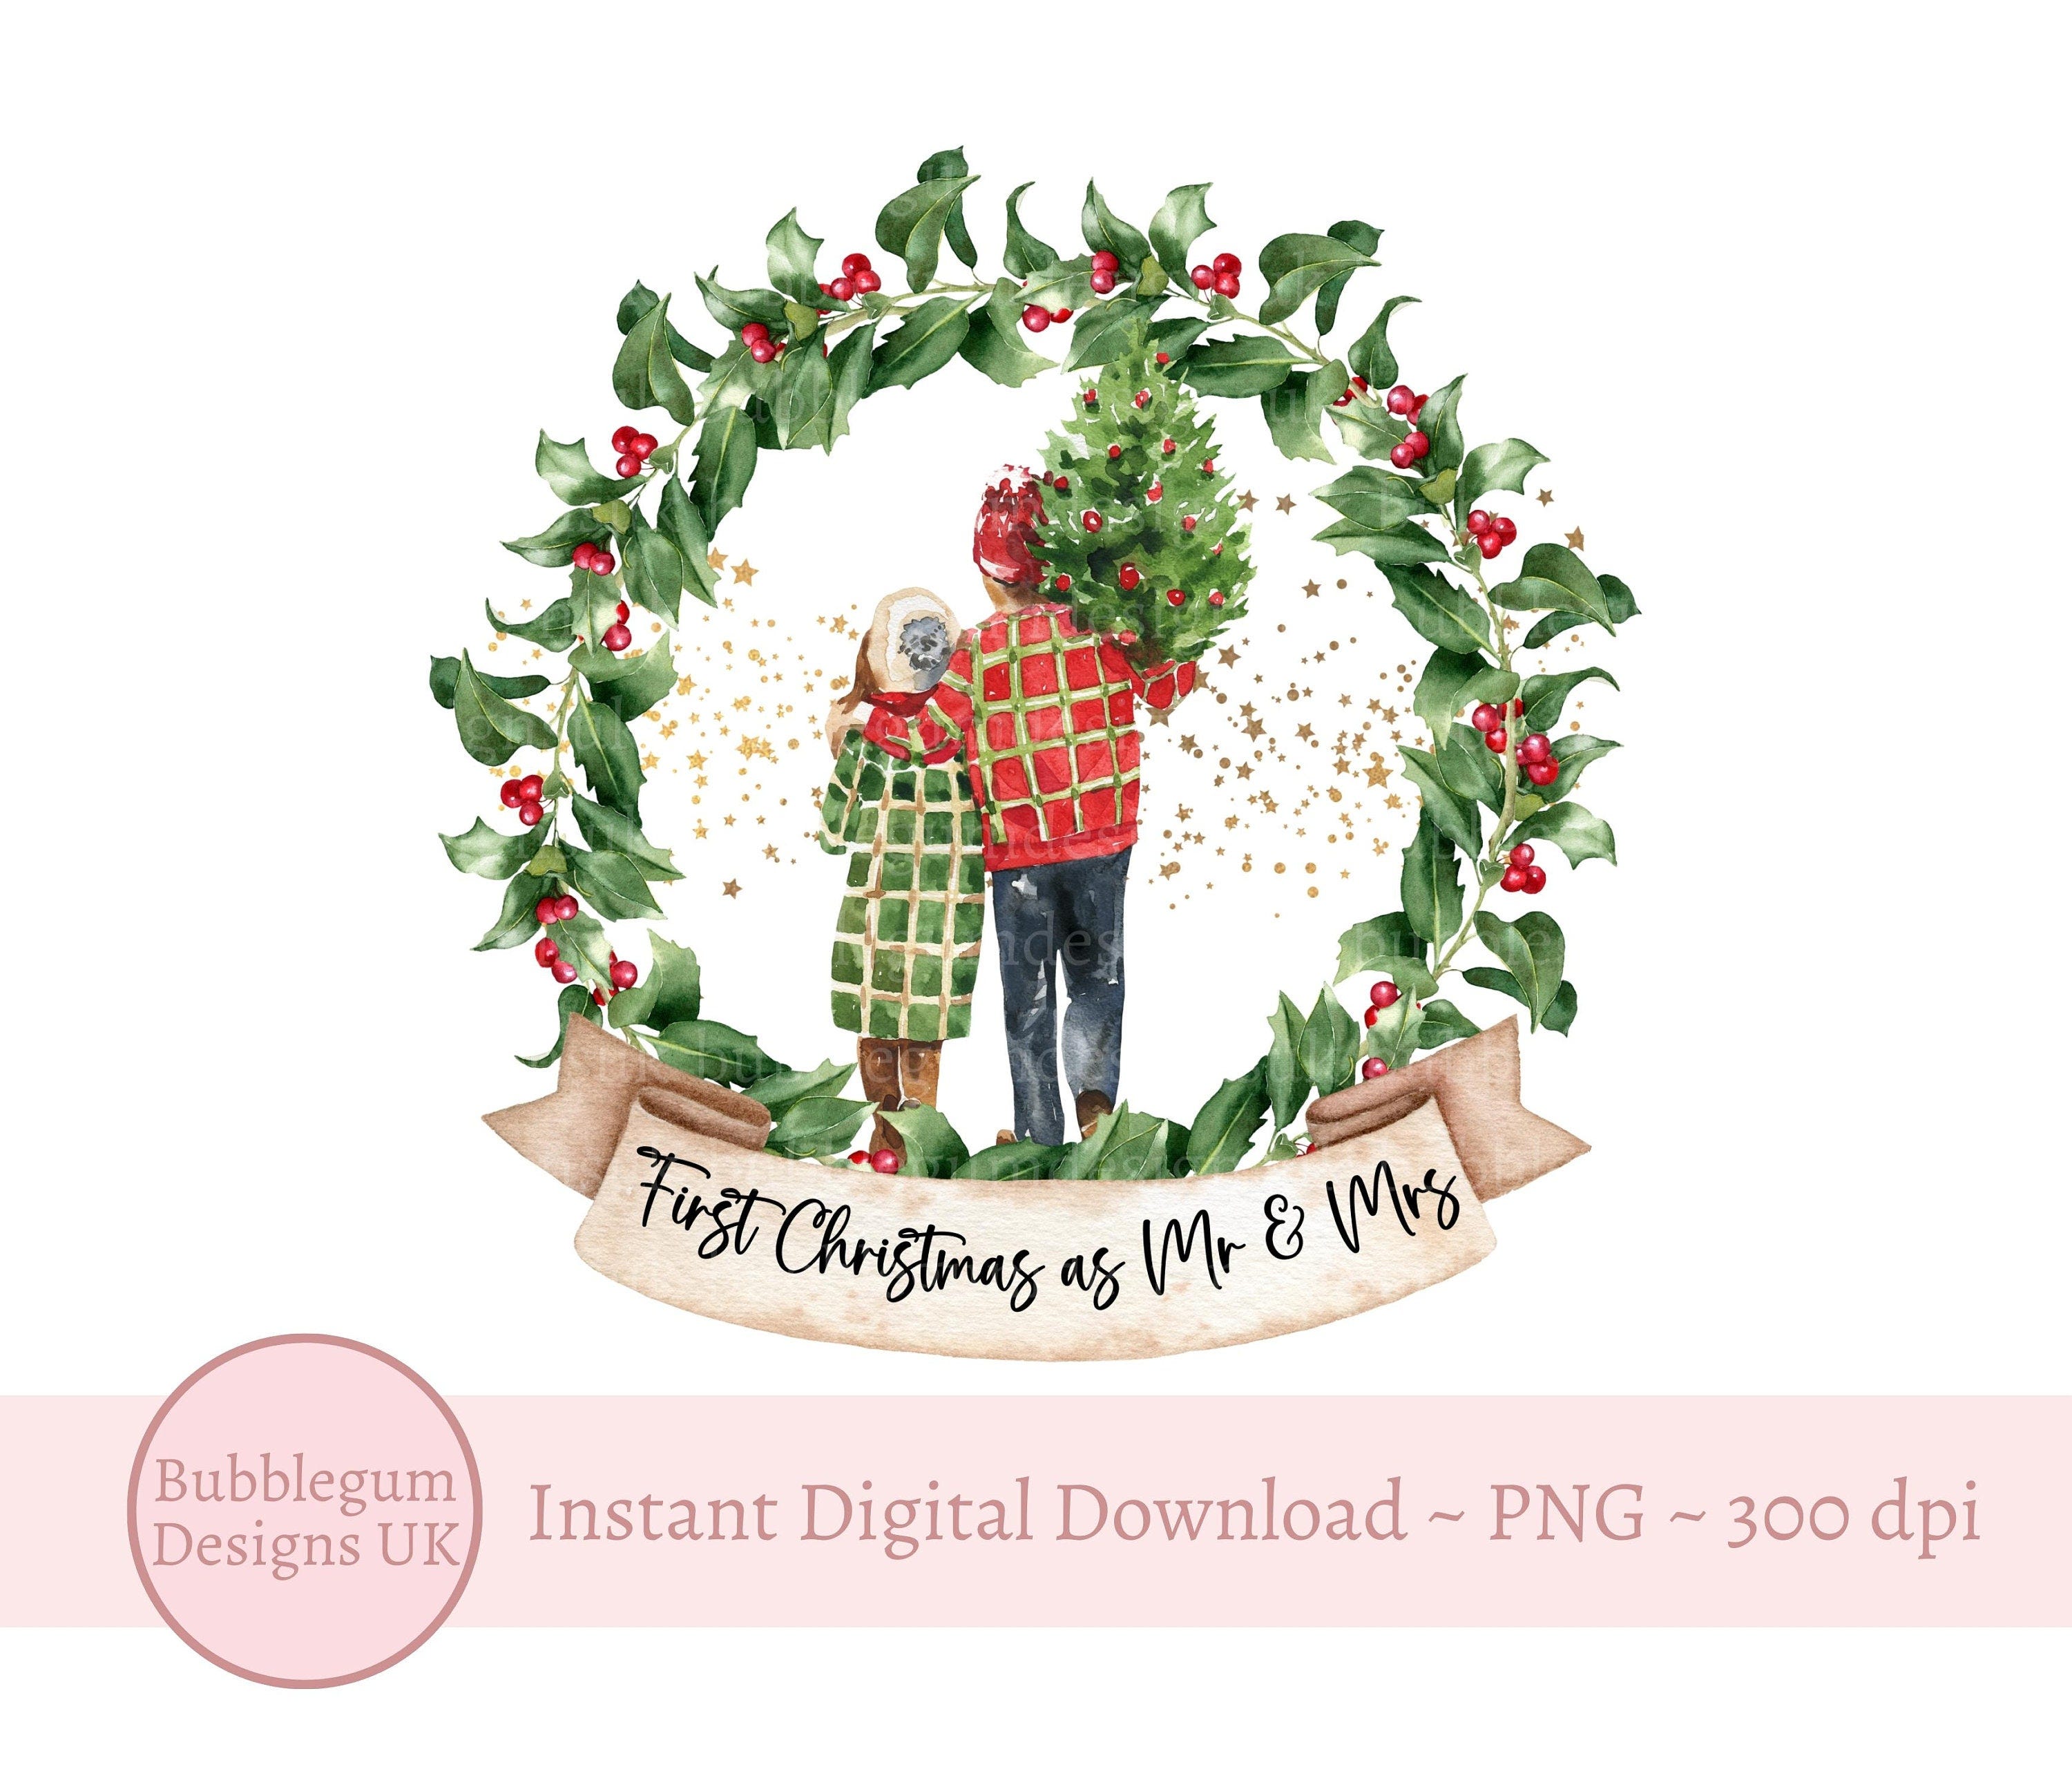 First Christmas As Mr & Mrs PNG, Christmas Card Design, Jolly Wreath, Bauble Design, Mr and Mrs PNG, Sublimation Design, Instant Download